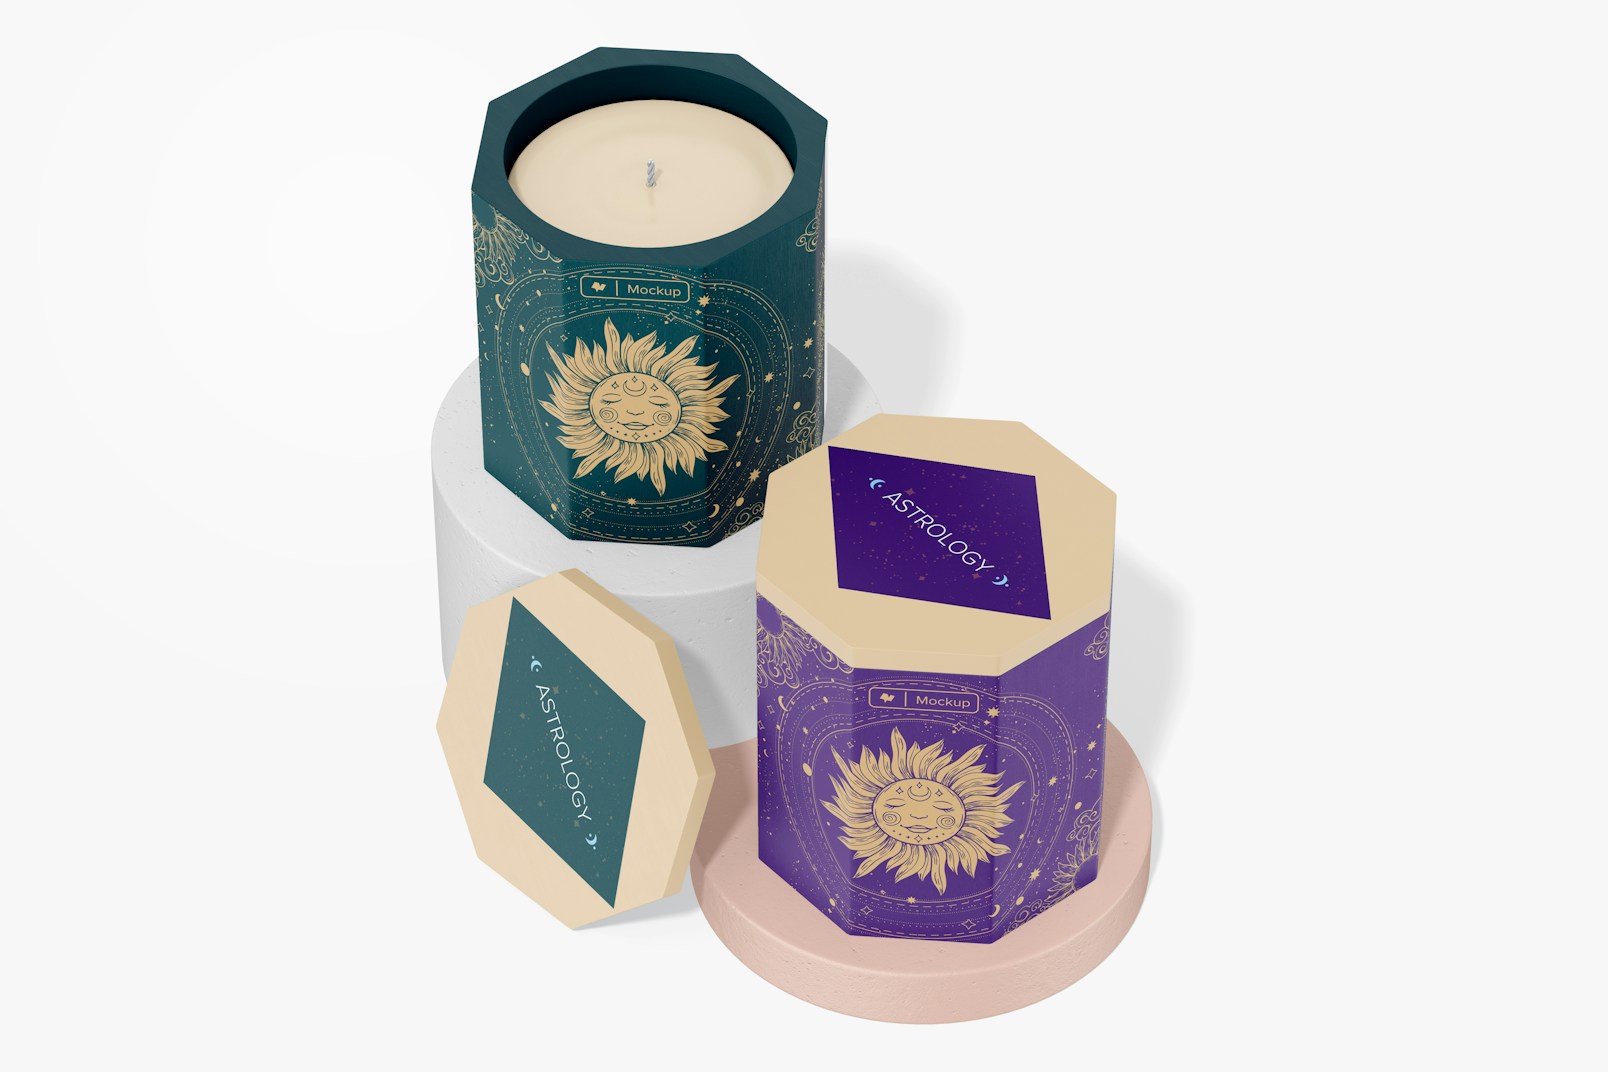 Octagonal Candles Mockup, Opened and Closed